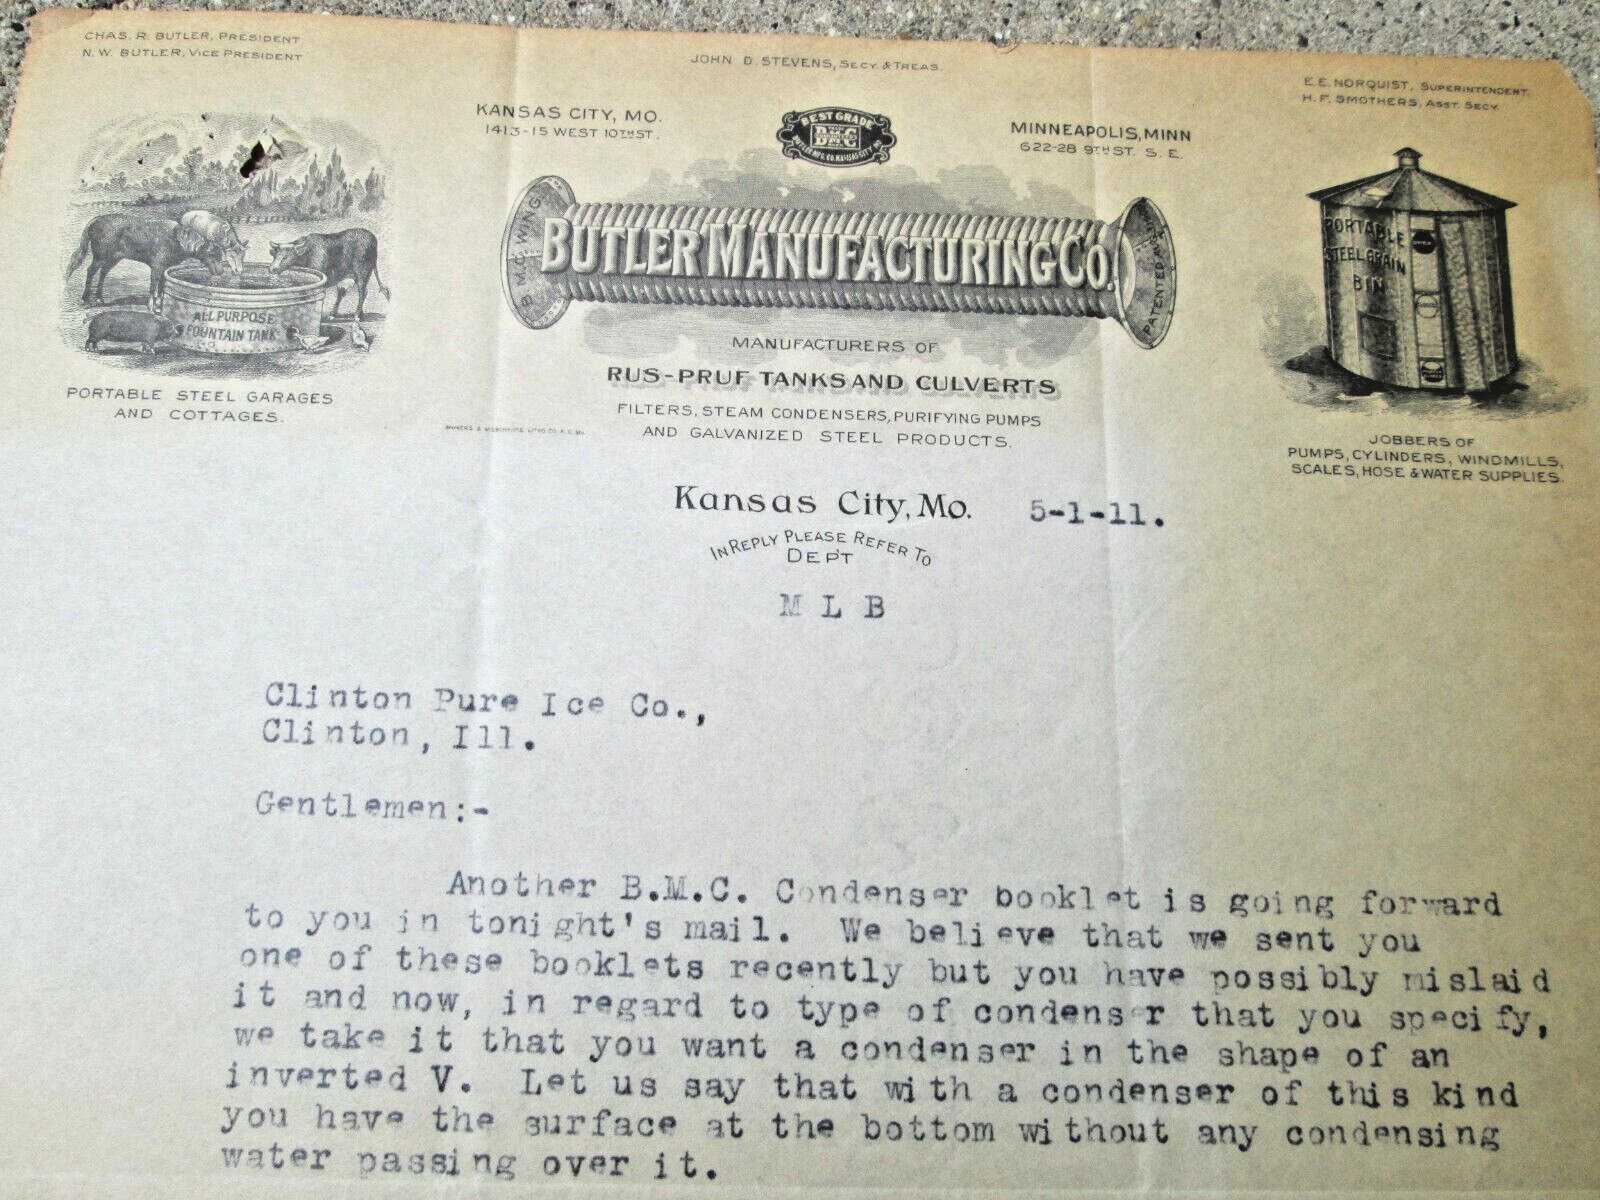 May 1 1911 Business Letterhead Letter Butler Manufacturing Co. Rus-Pruf Tanks KC